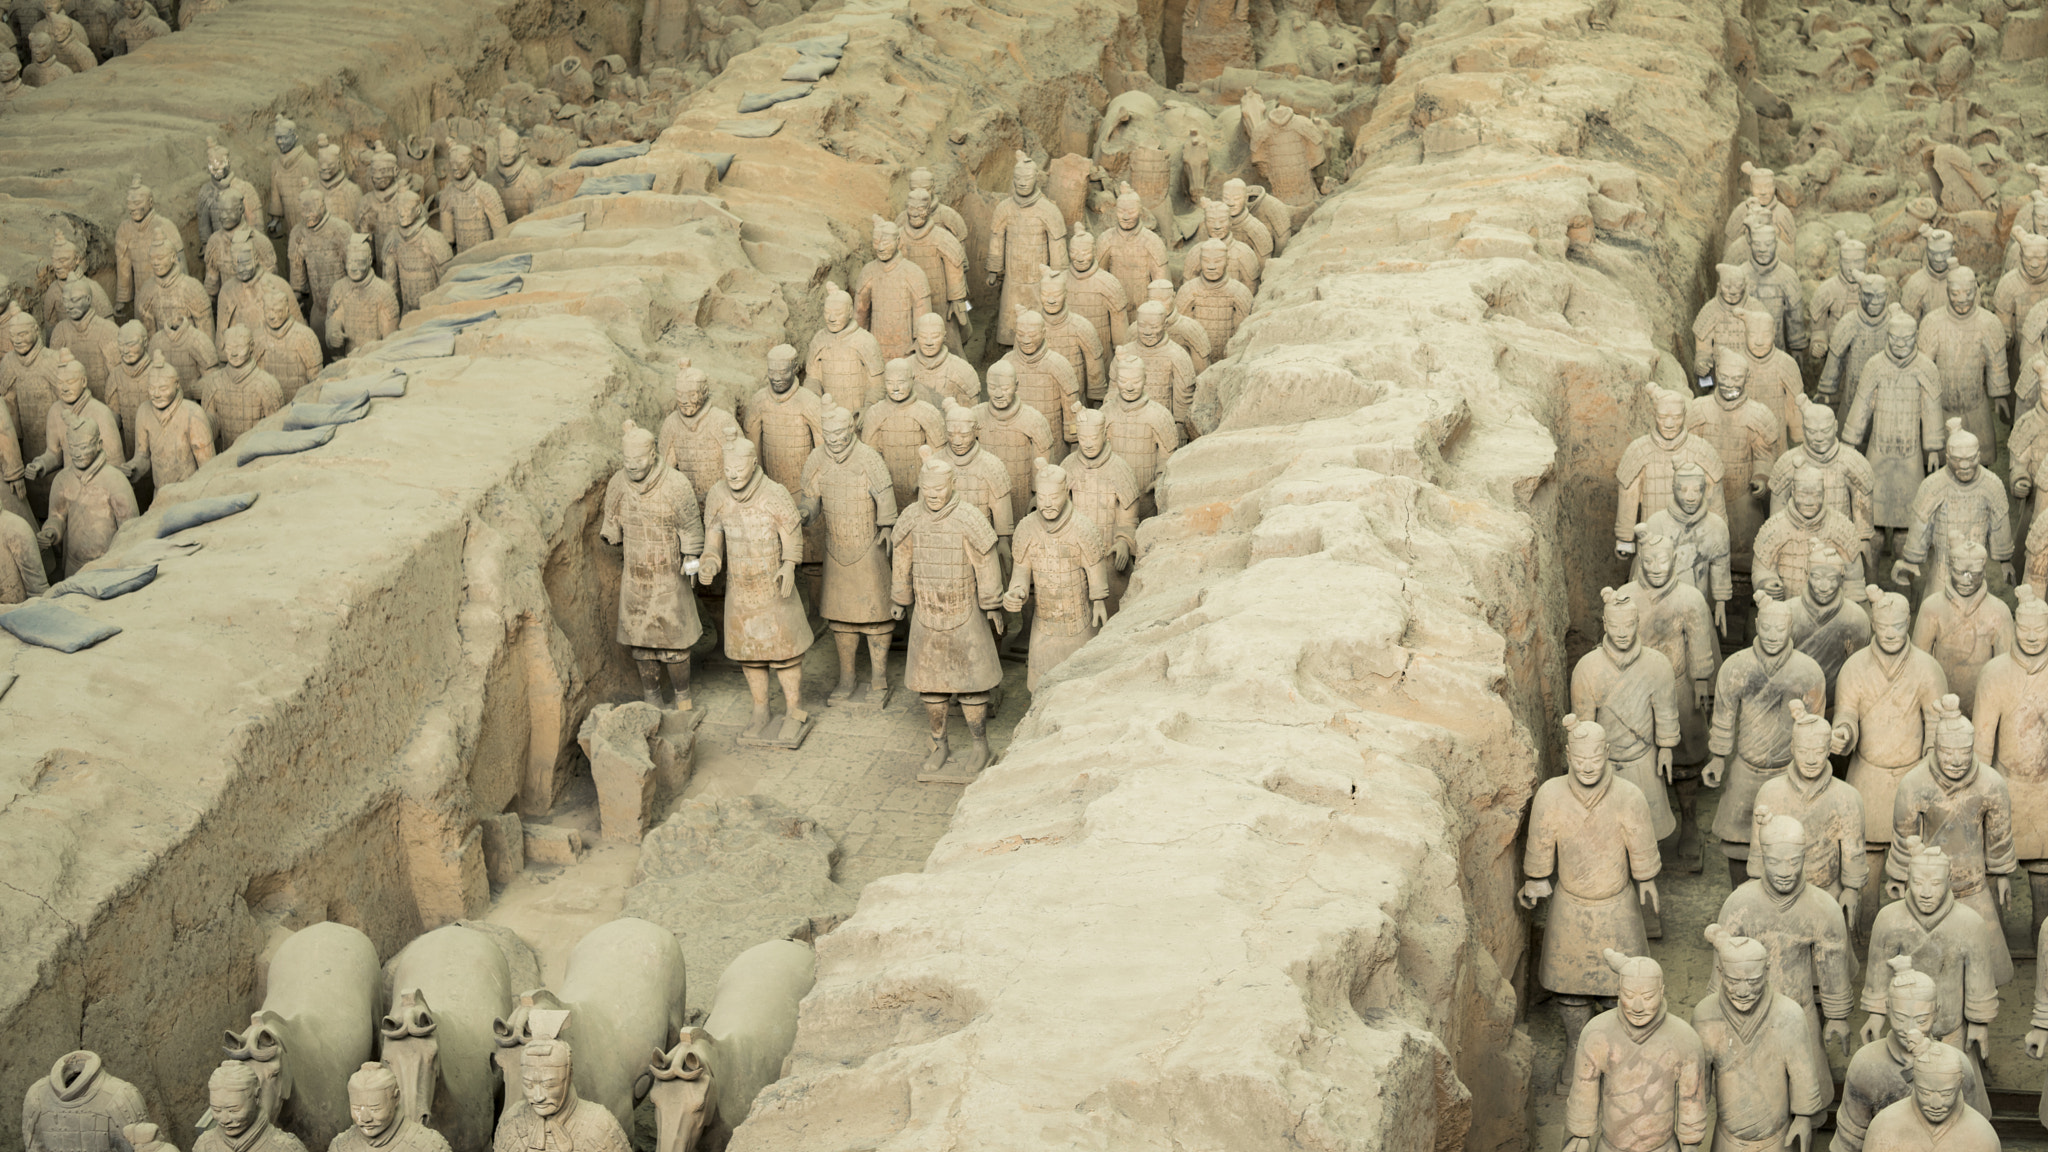 Sony a7R II + E 50mm F2 sample photo. Pit n.1 terracotta army photography